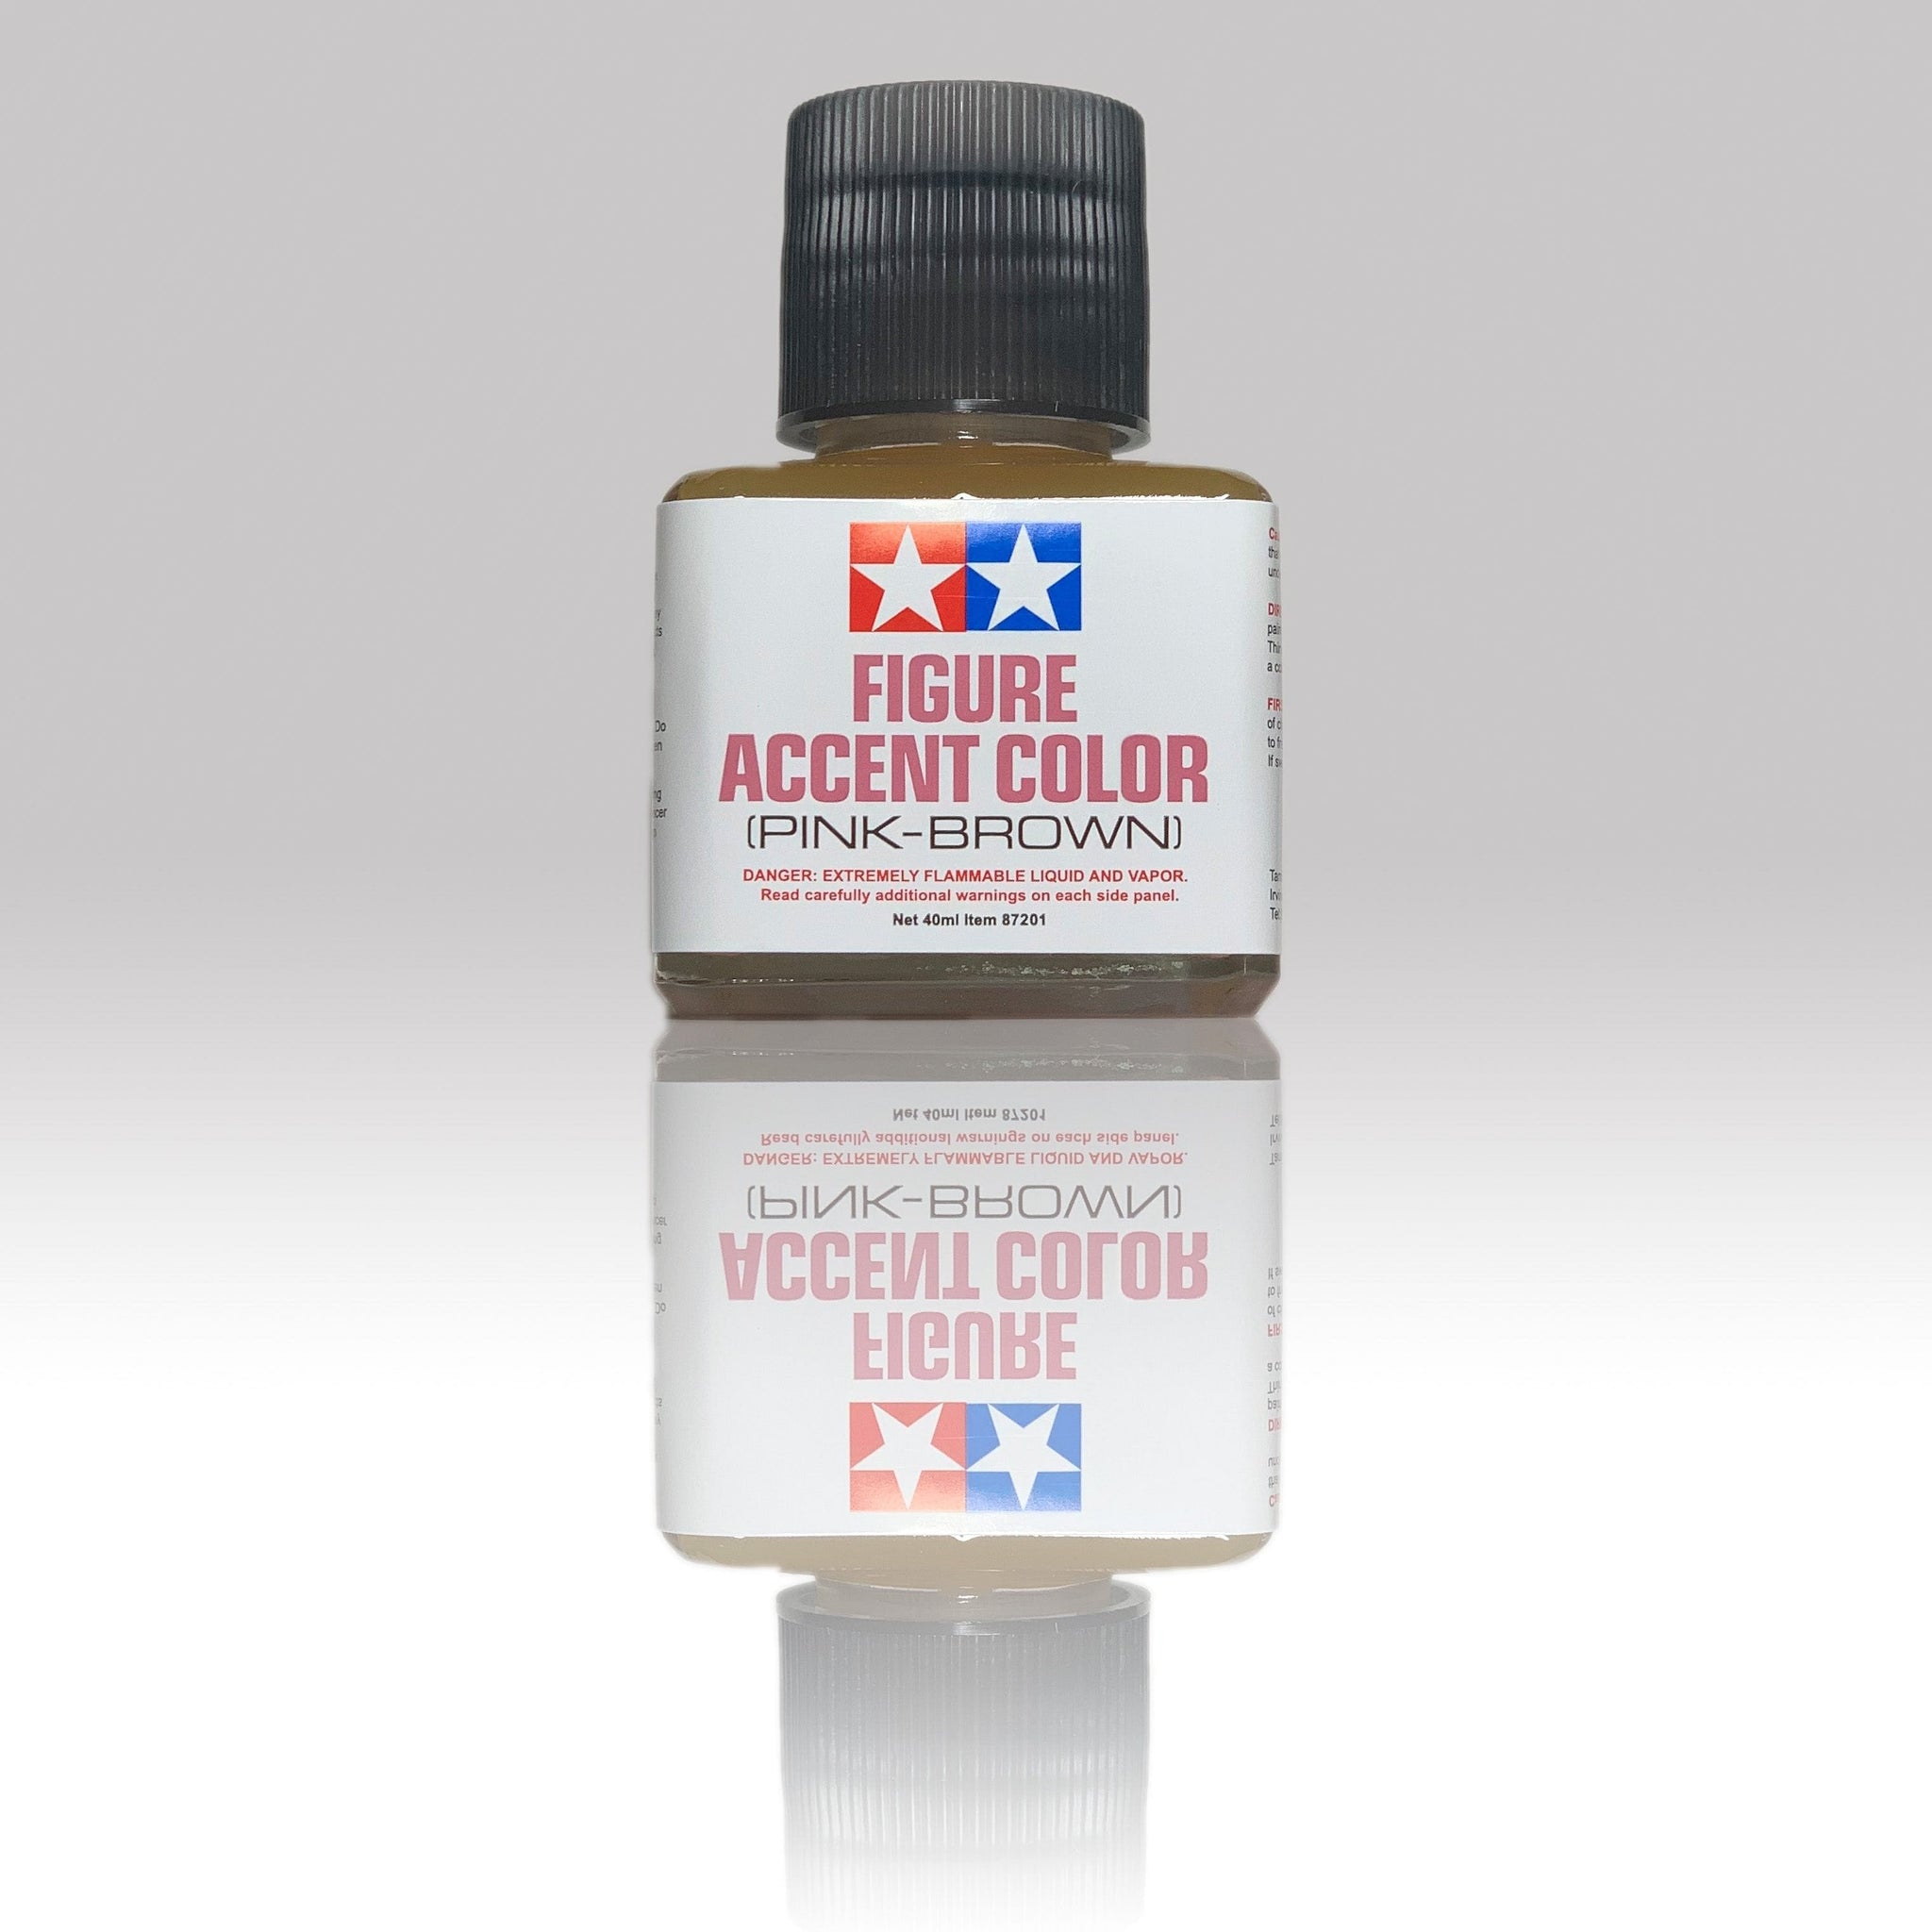 Bottled lacquer paints from Tamiya mean you can broaden your